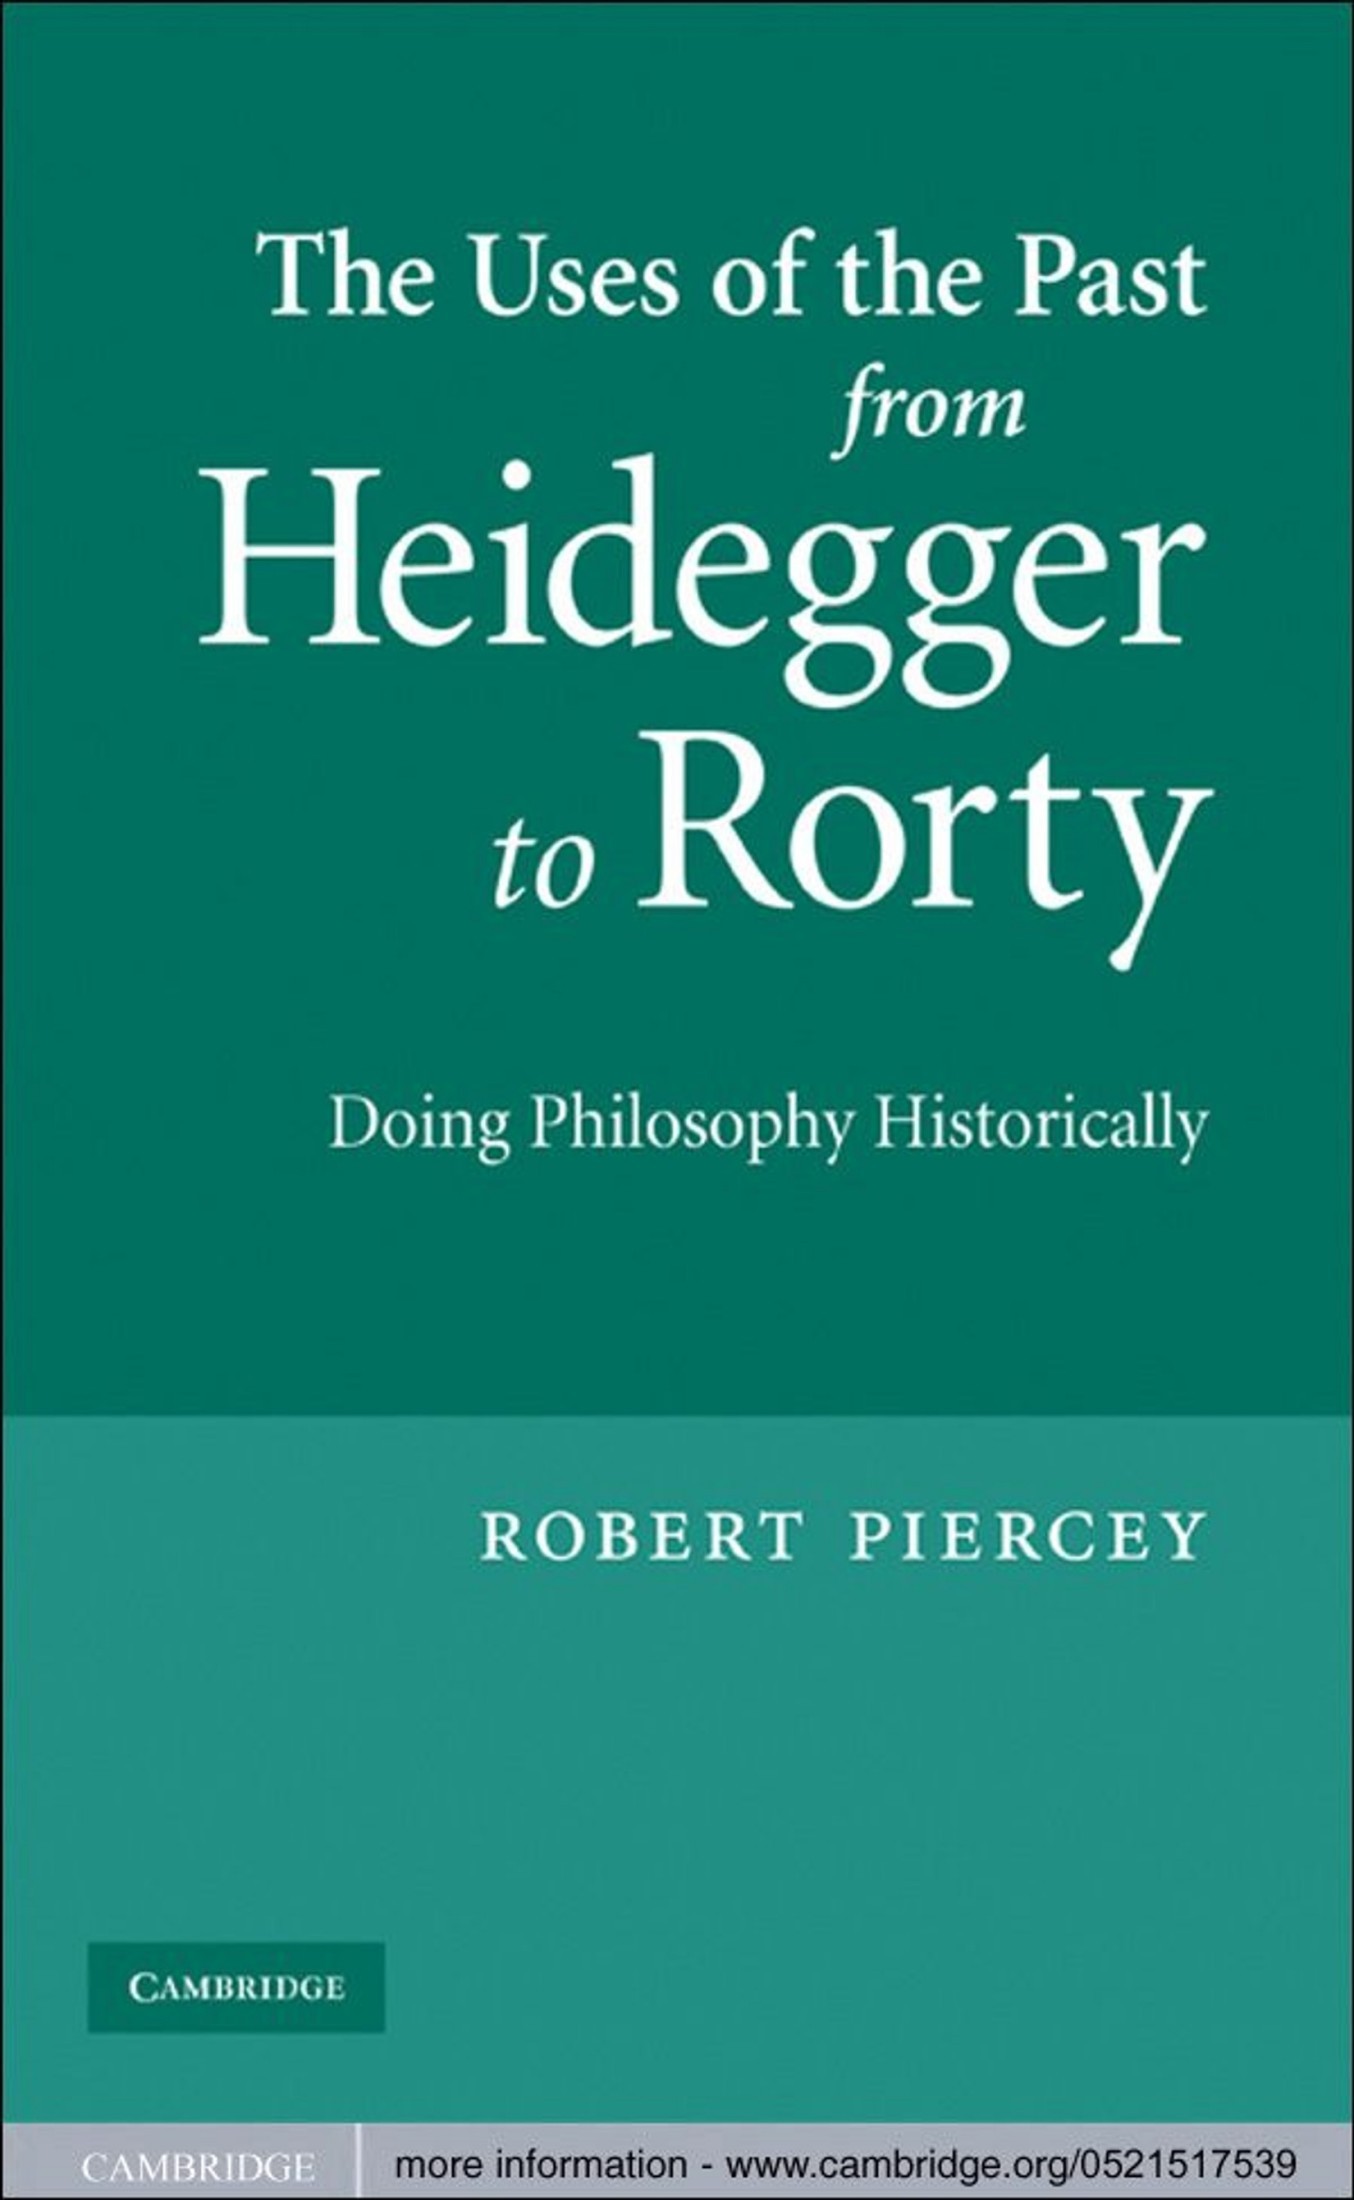 The Uses of the Past From Heidegger to Rorty